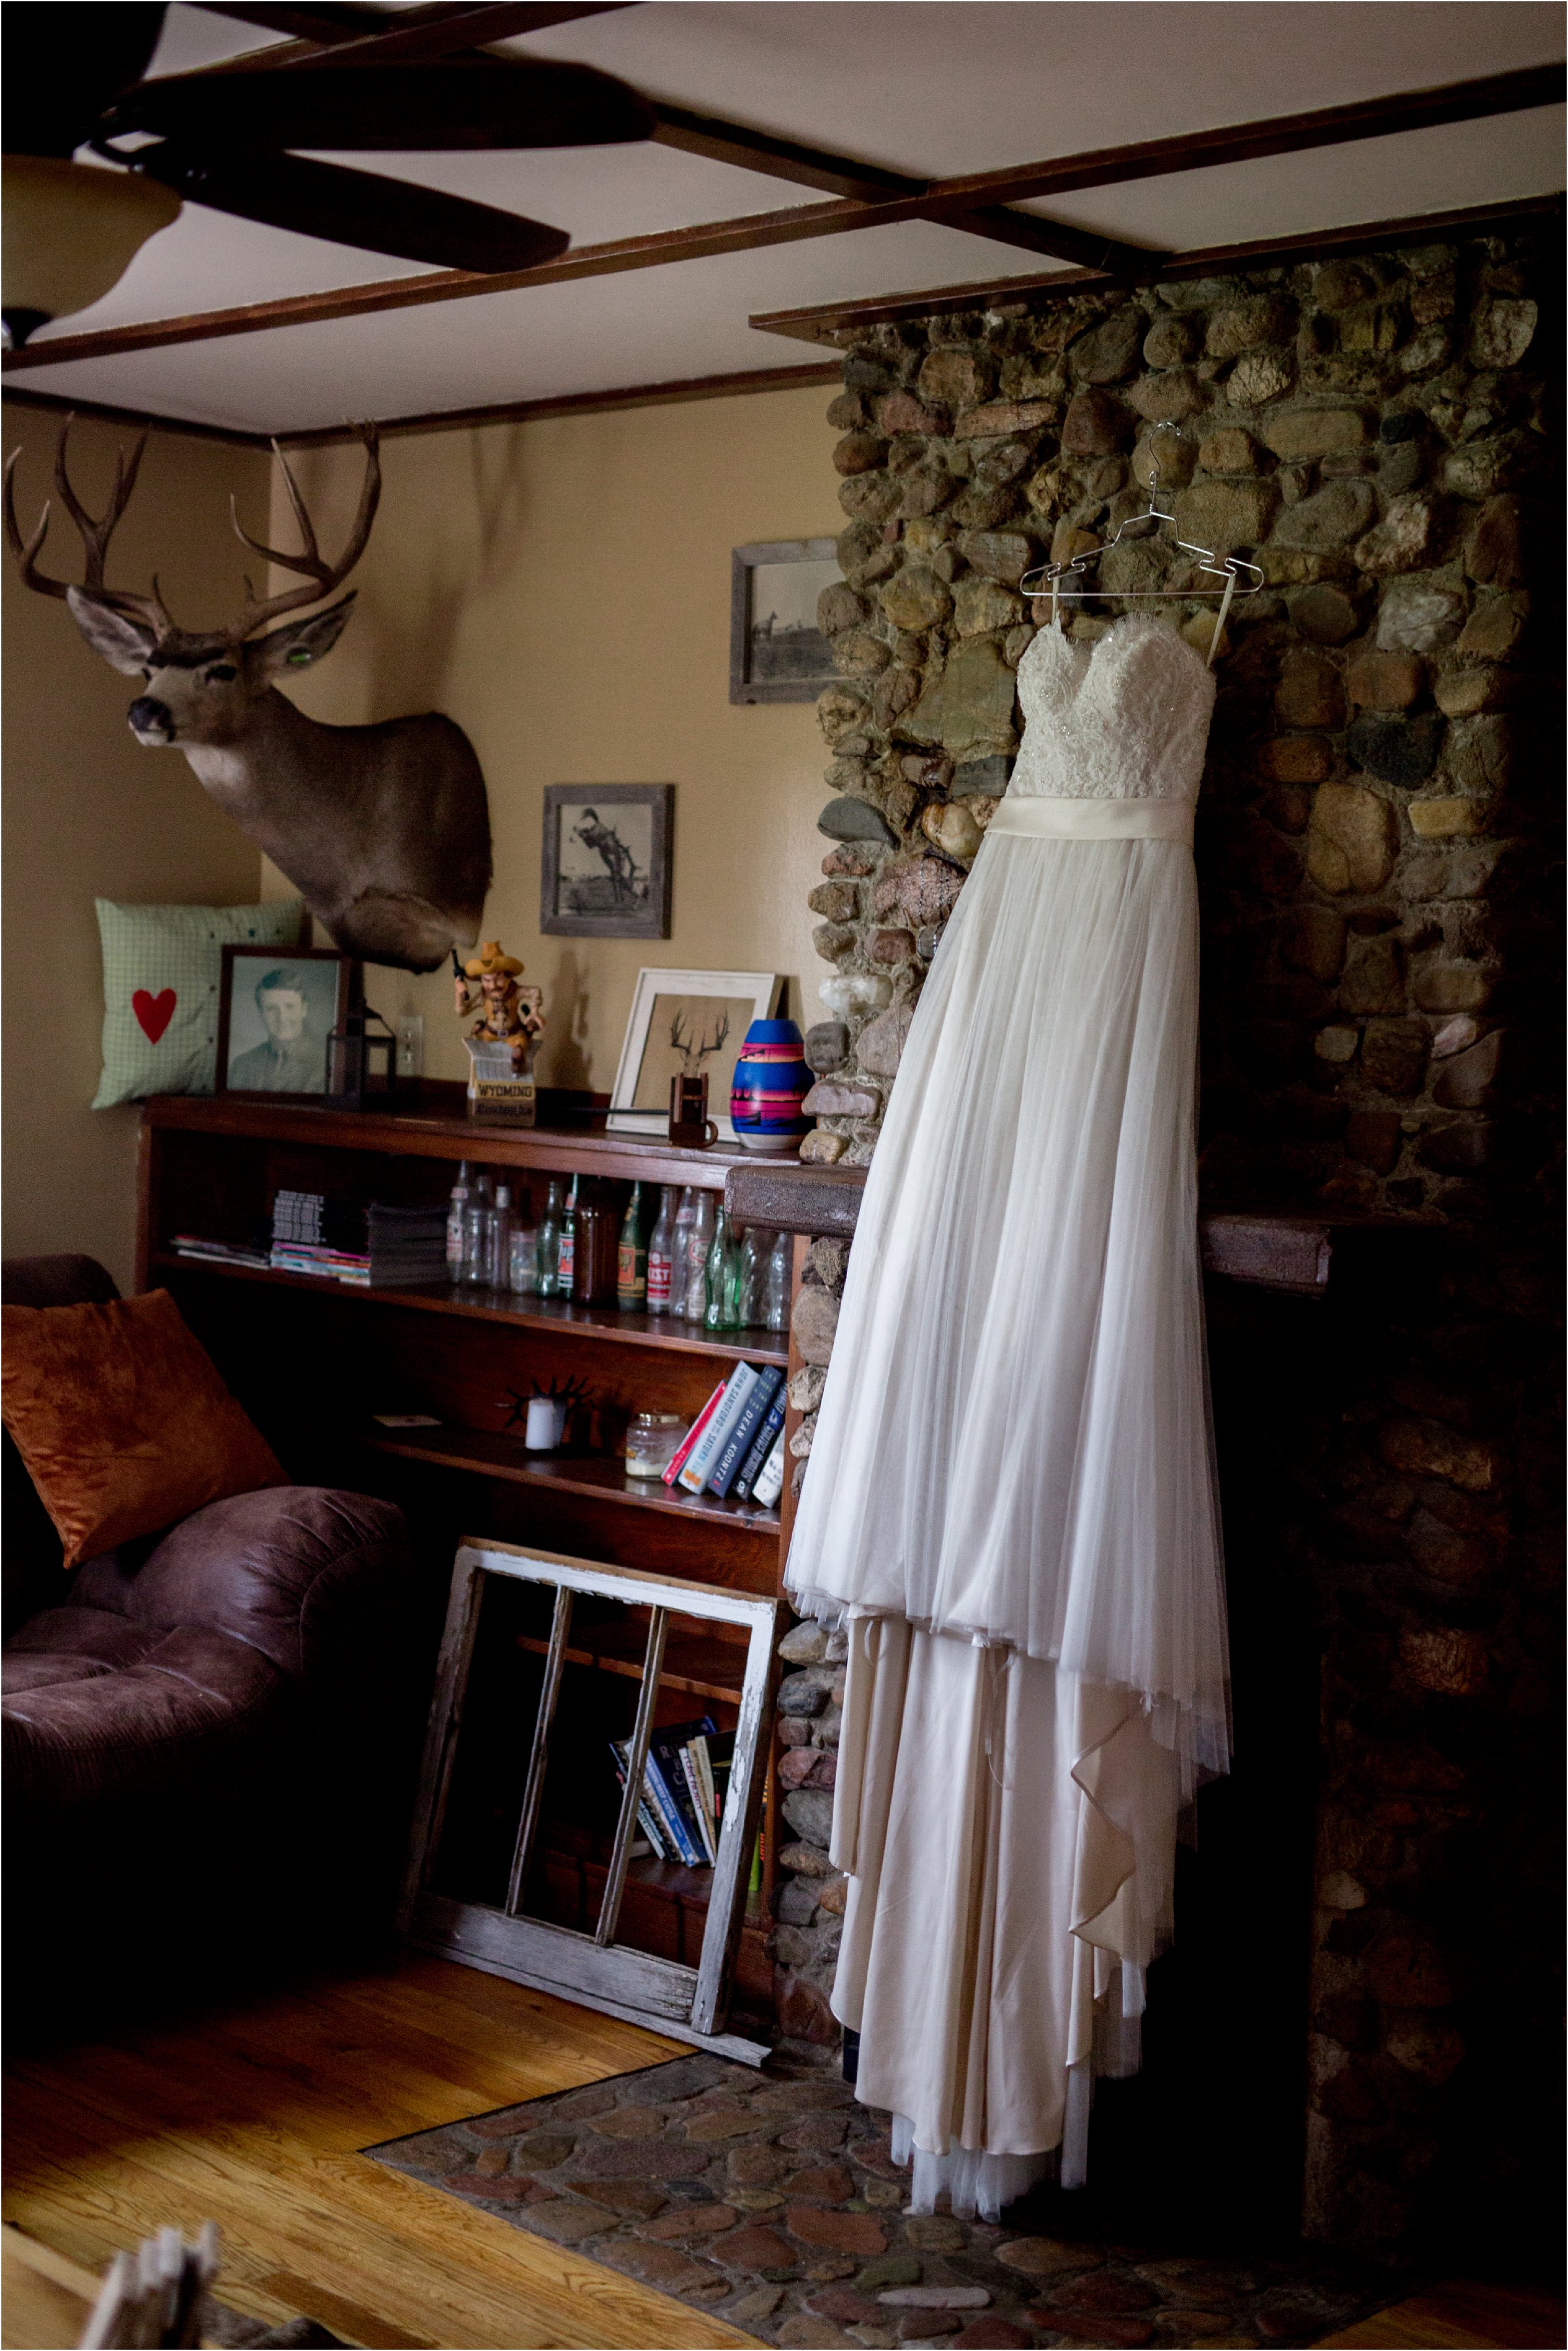 the bride's wedding dress hanging in their living room on the historic stone fireplace